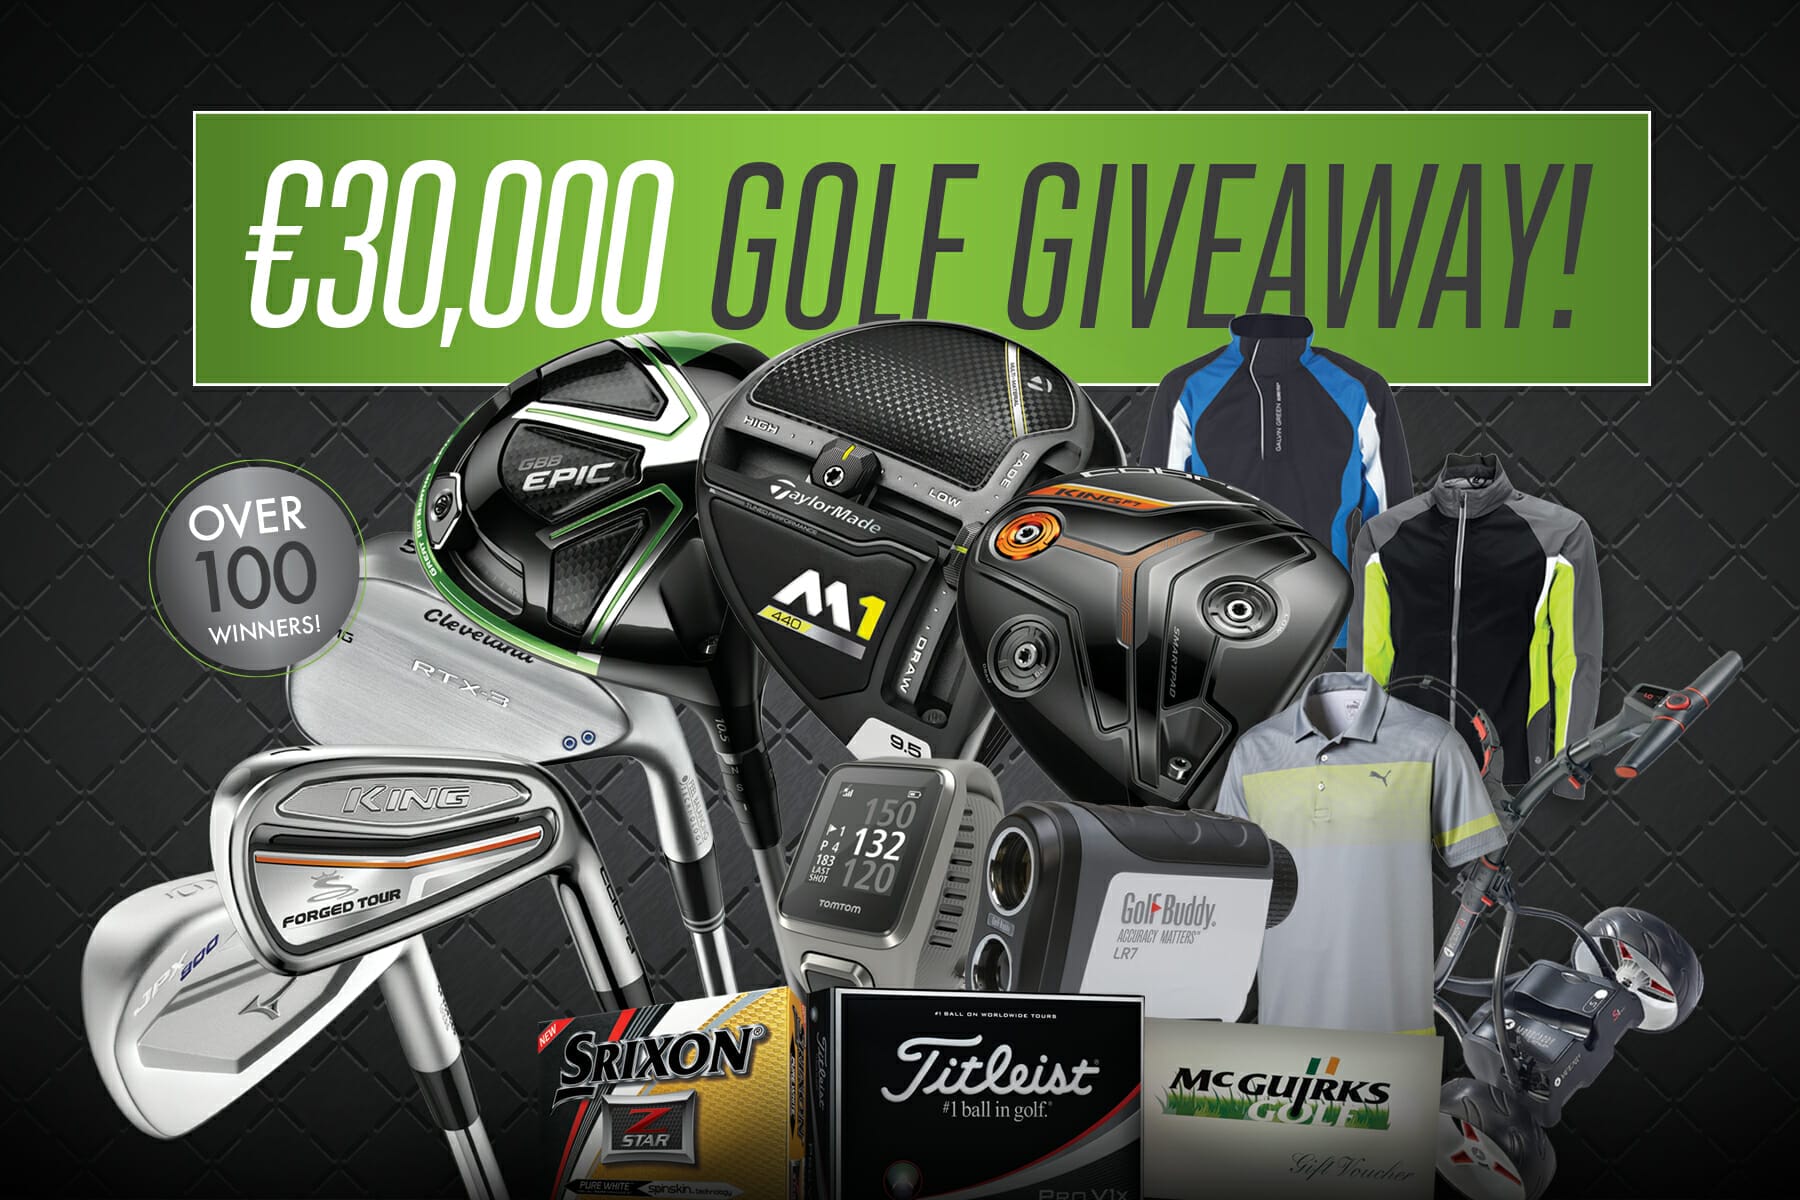 €30,000 golf giveaway competition – 2017 Results